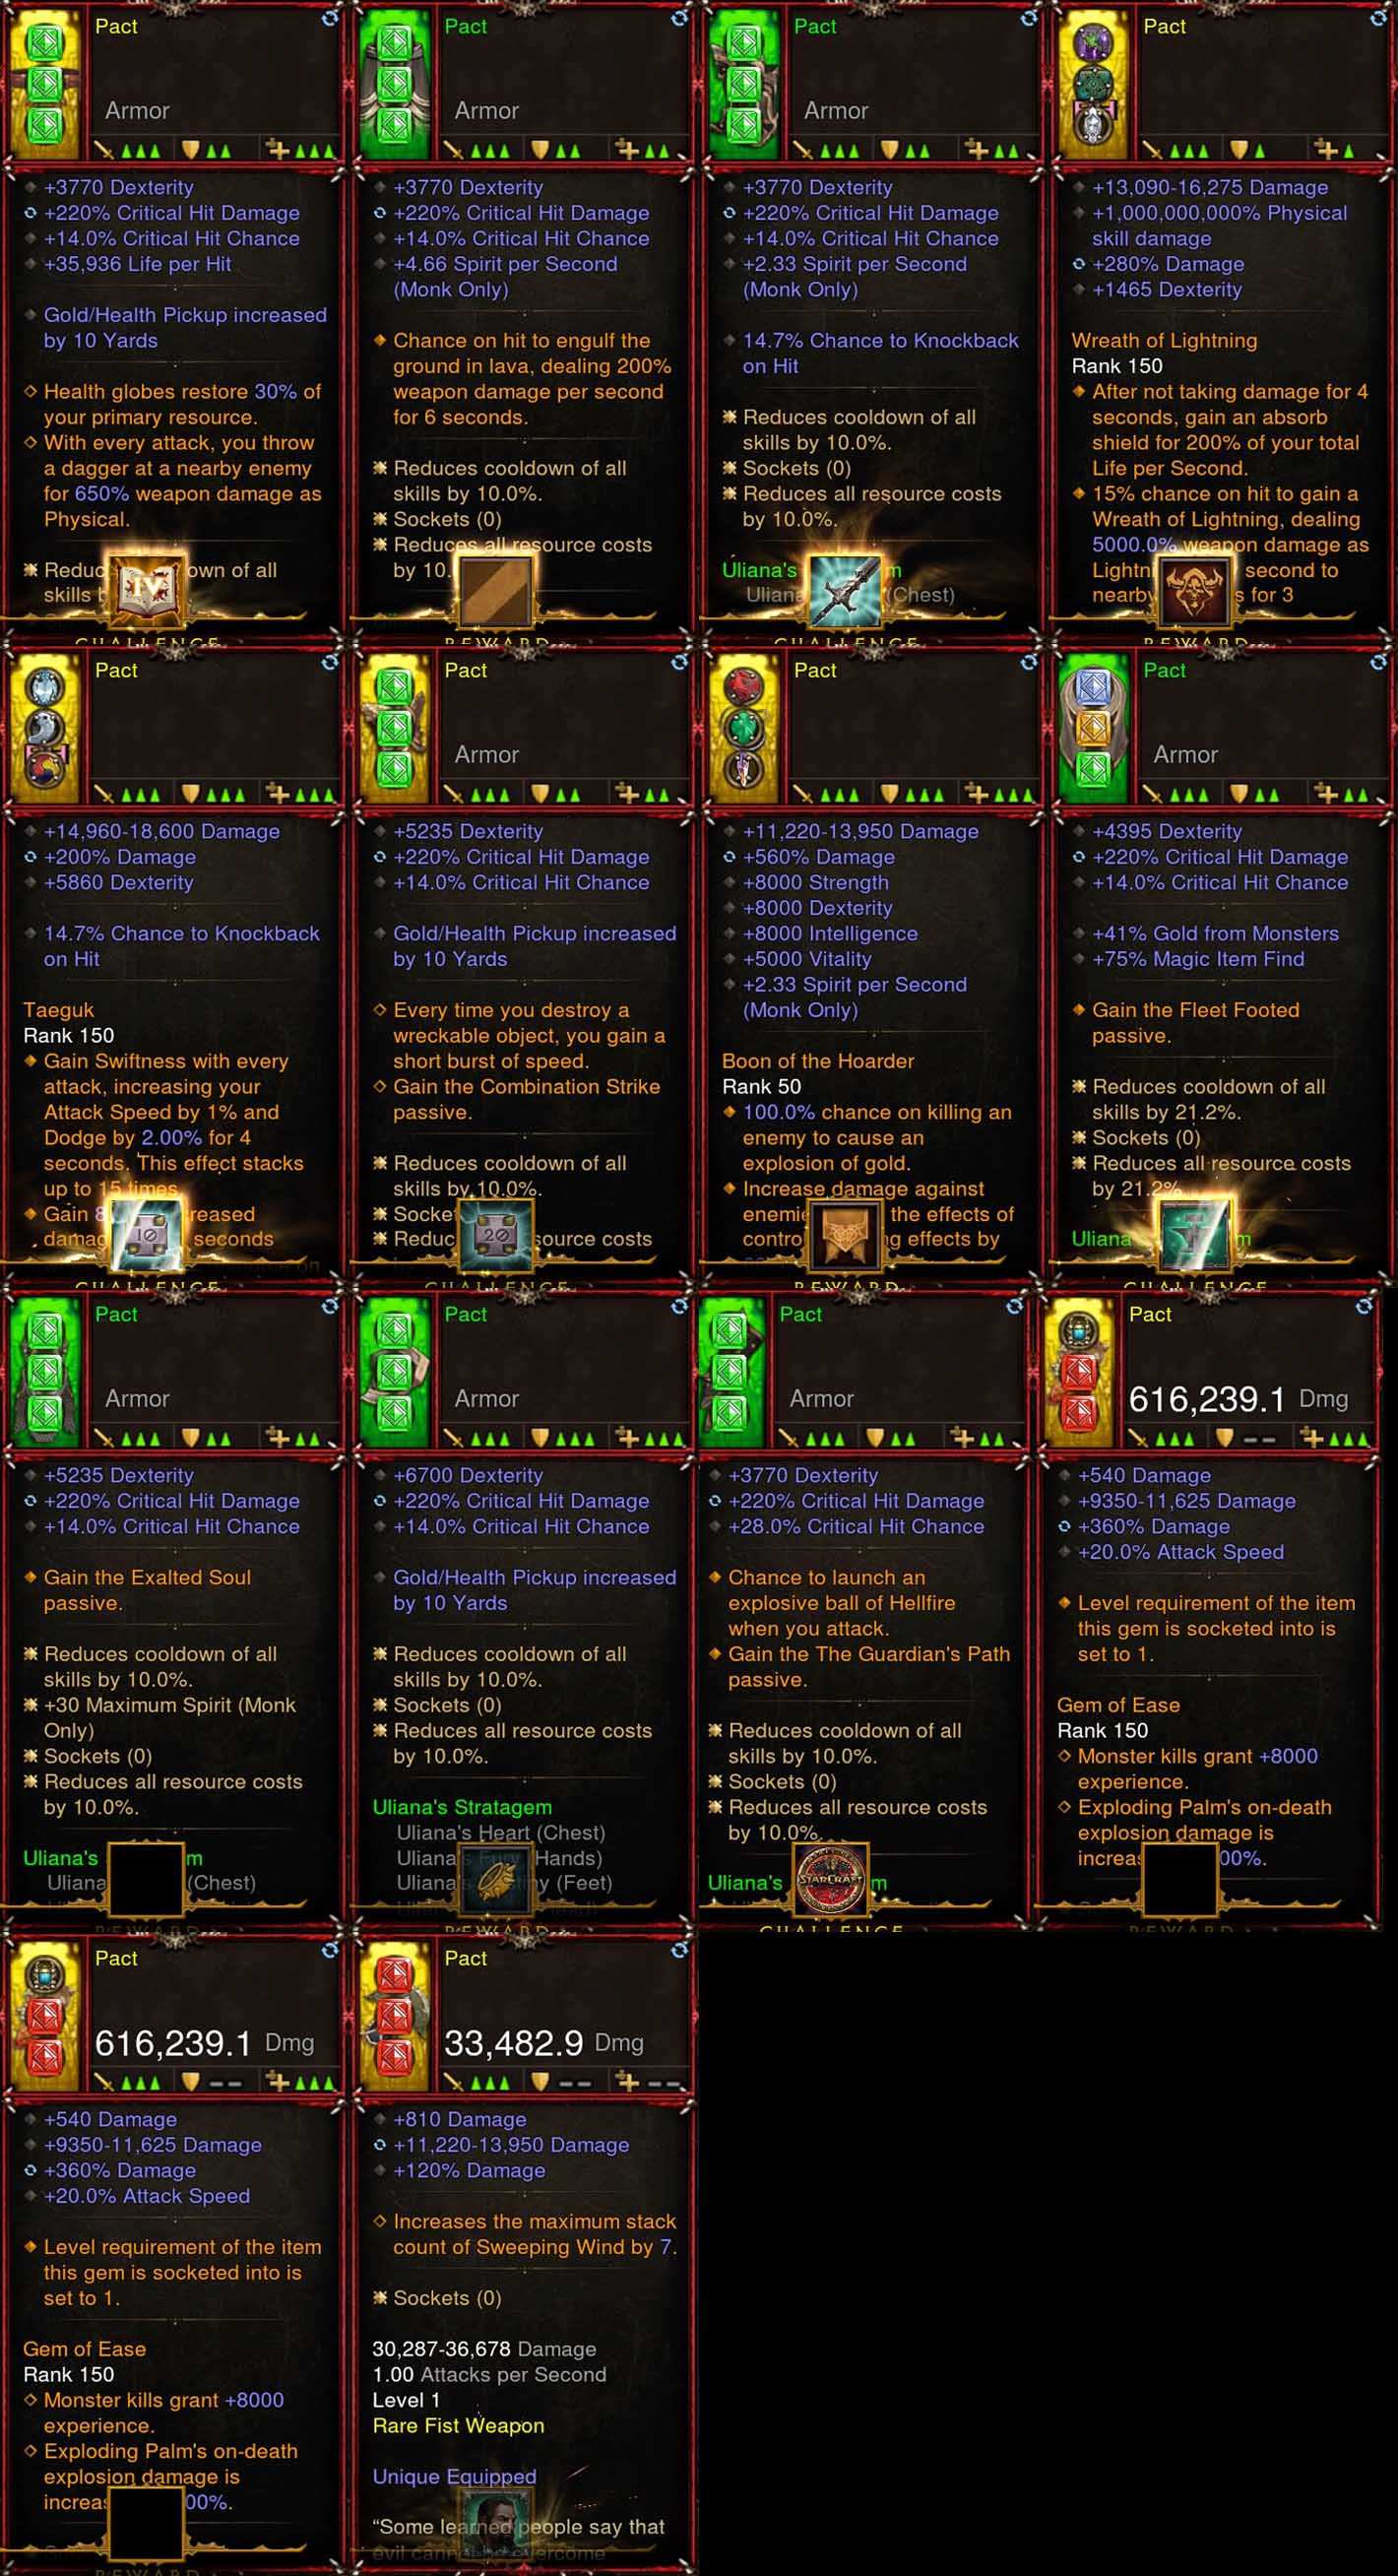 [Primal Ancient] 1-70 Ulania Monk Set Pact for gRift 150 Diablo 3 Mods ROS Seasonal and Non Seasonal Save Mod - Modded Items and Gear - Hacks - Cheats - Trainers for Playstation 4 - Playstation 5 - Nintendo Switch - Xbox One